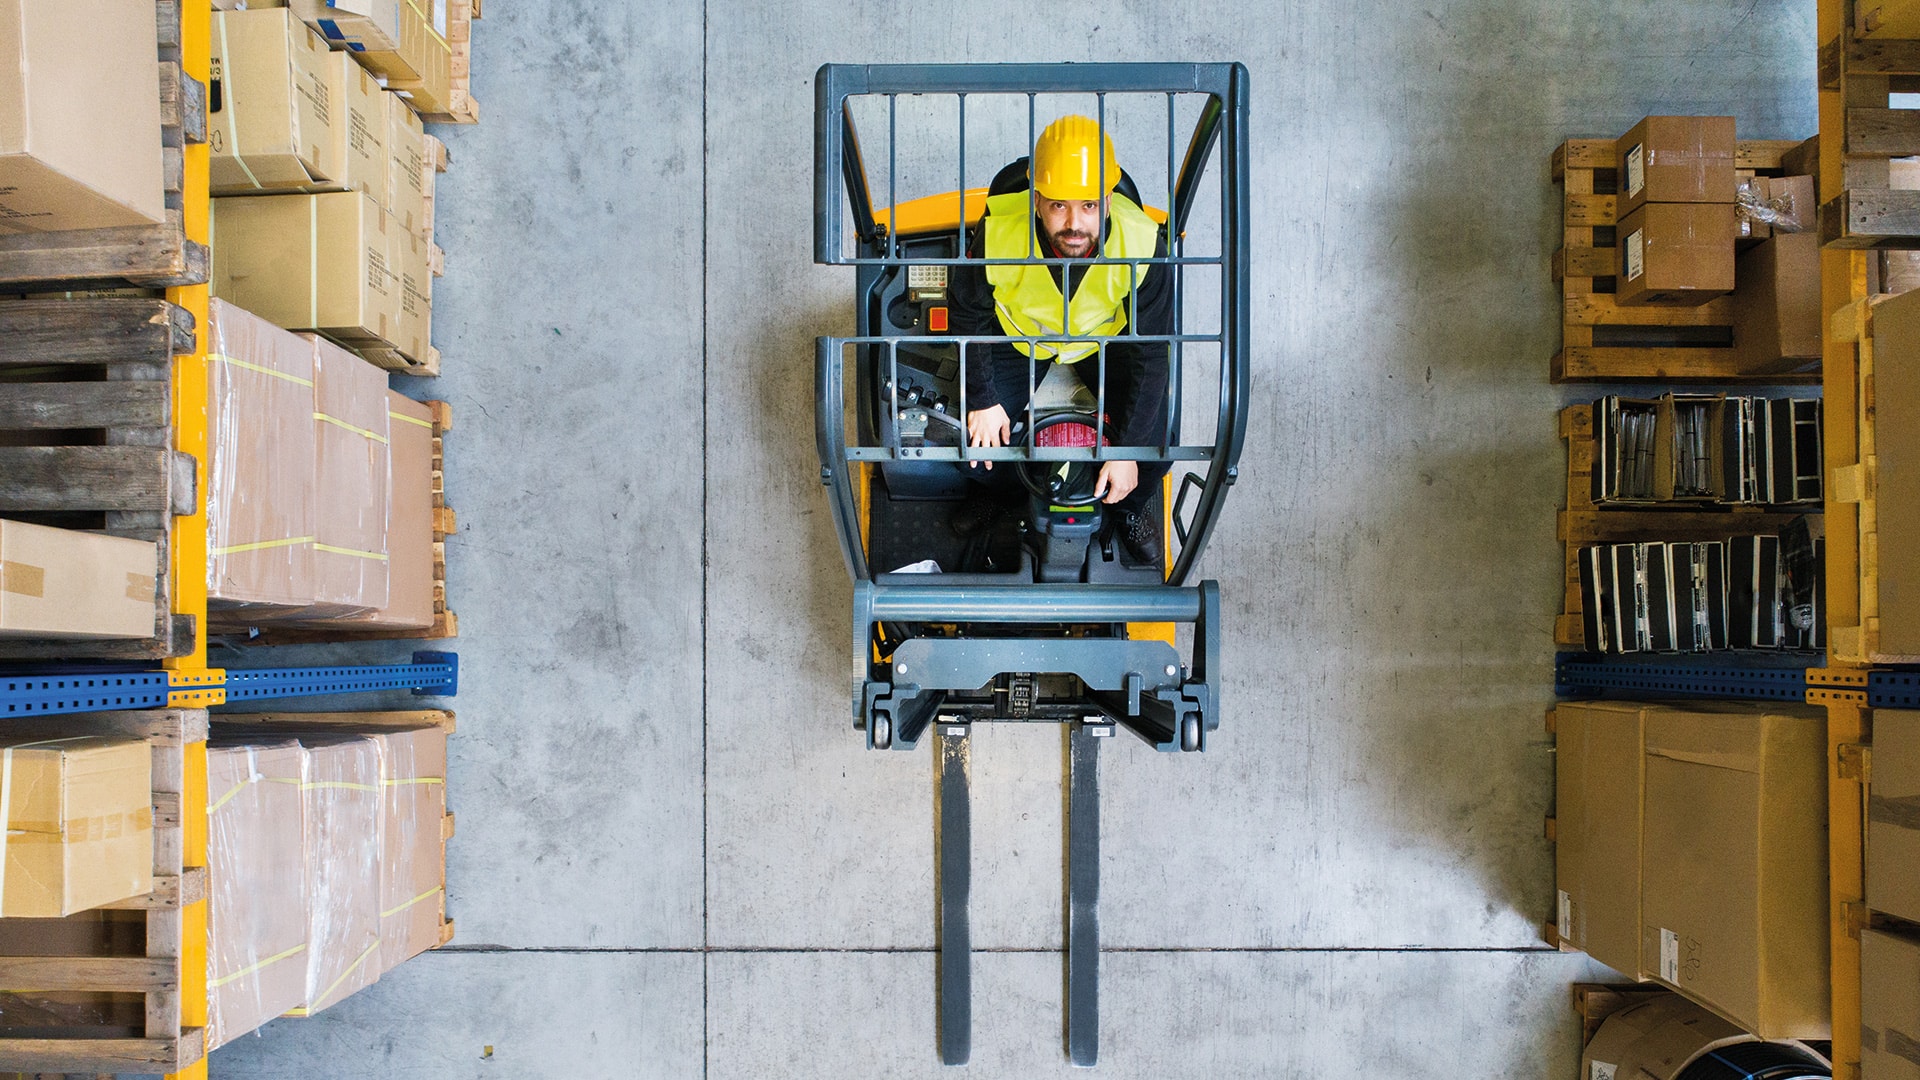 A photo of a man in a forklift looking up at the camera.